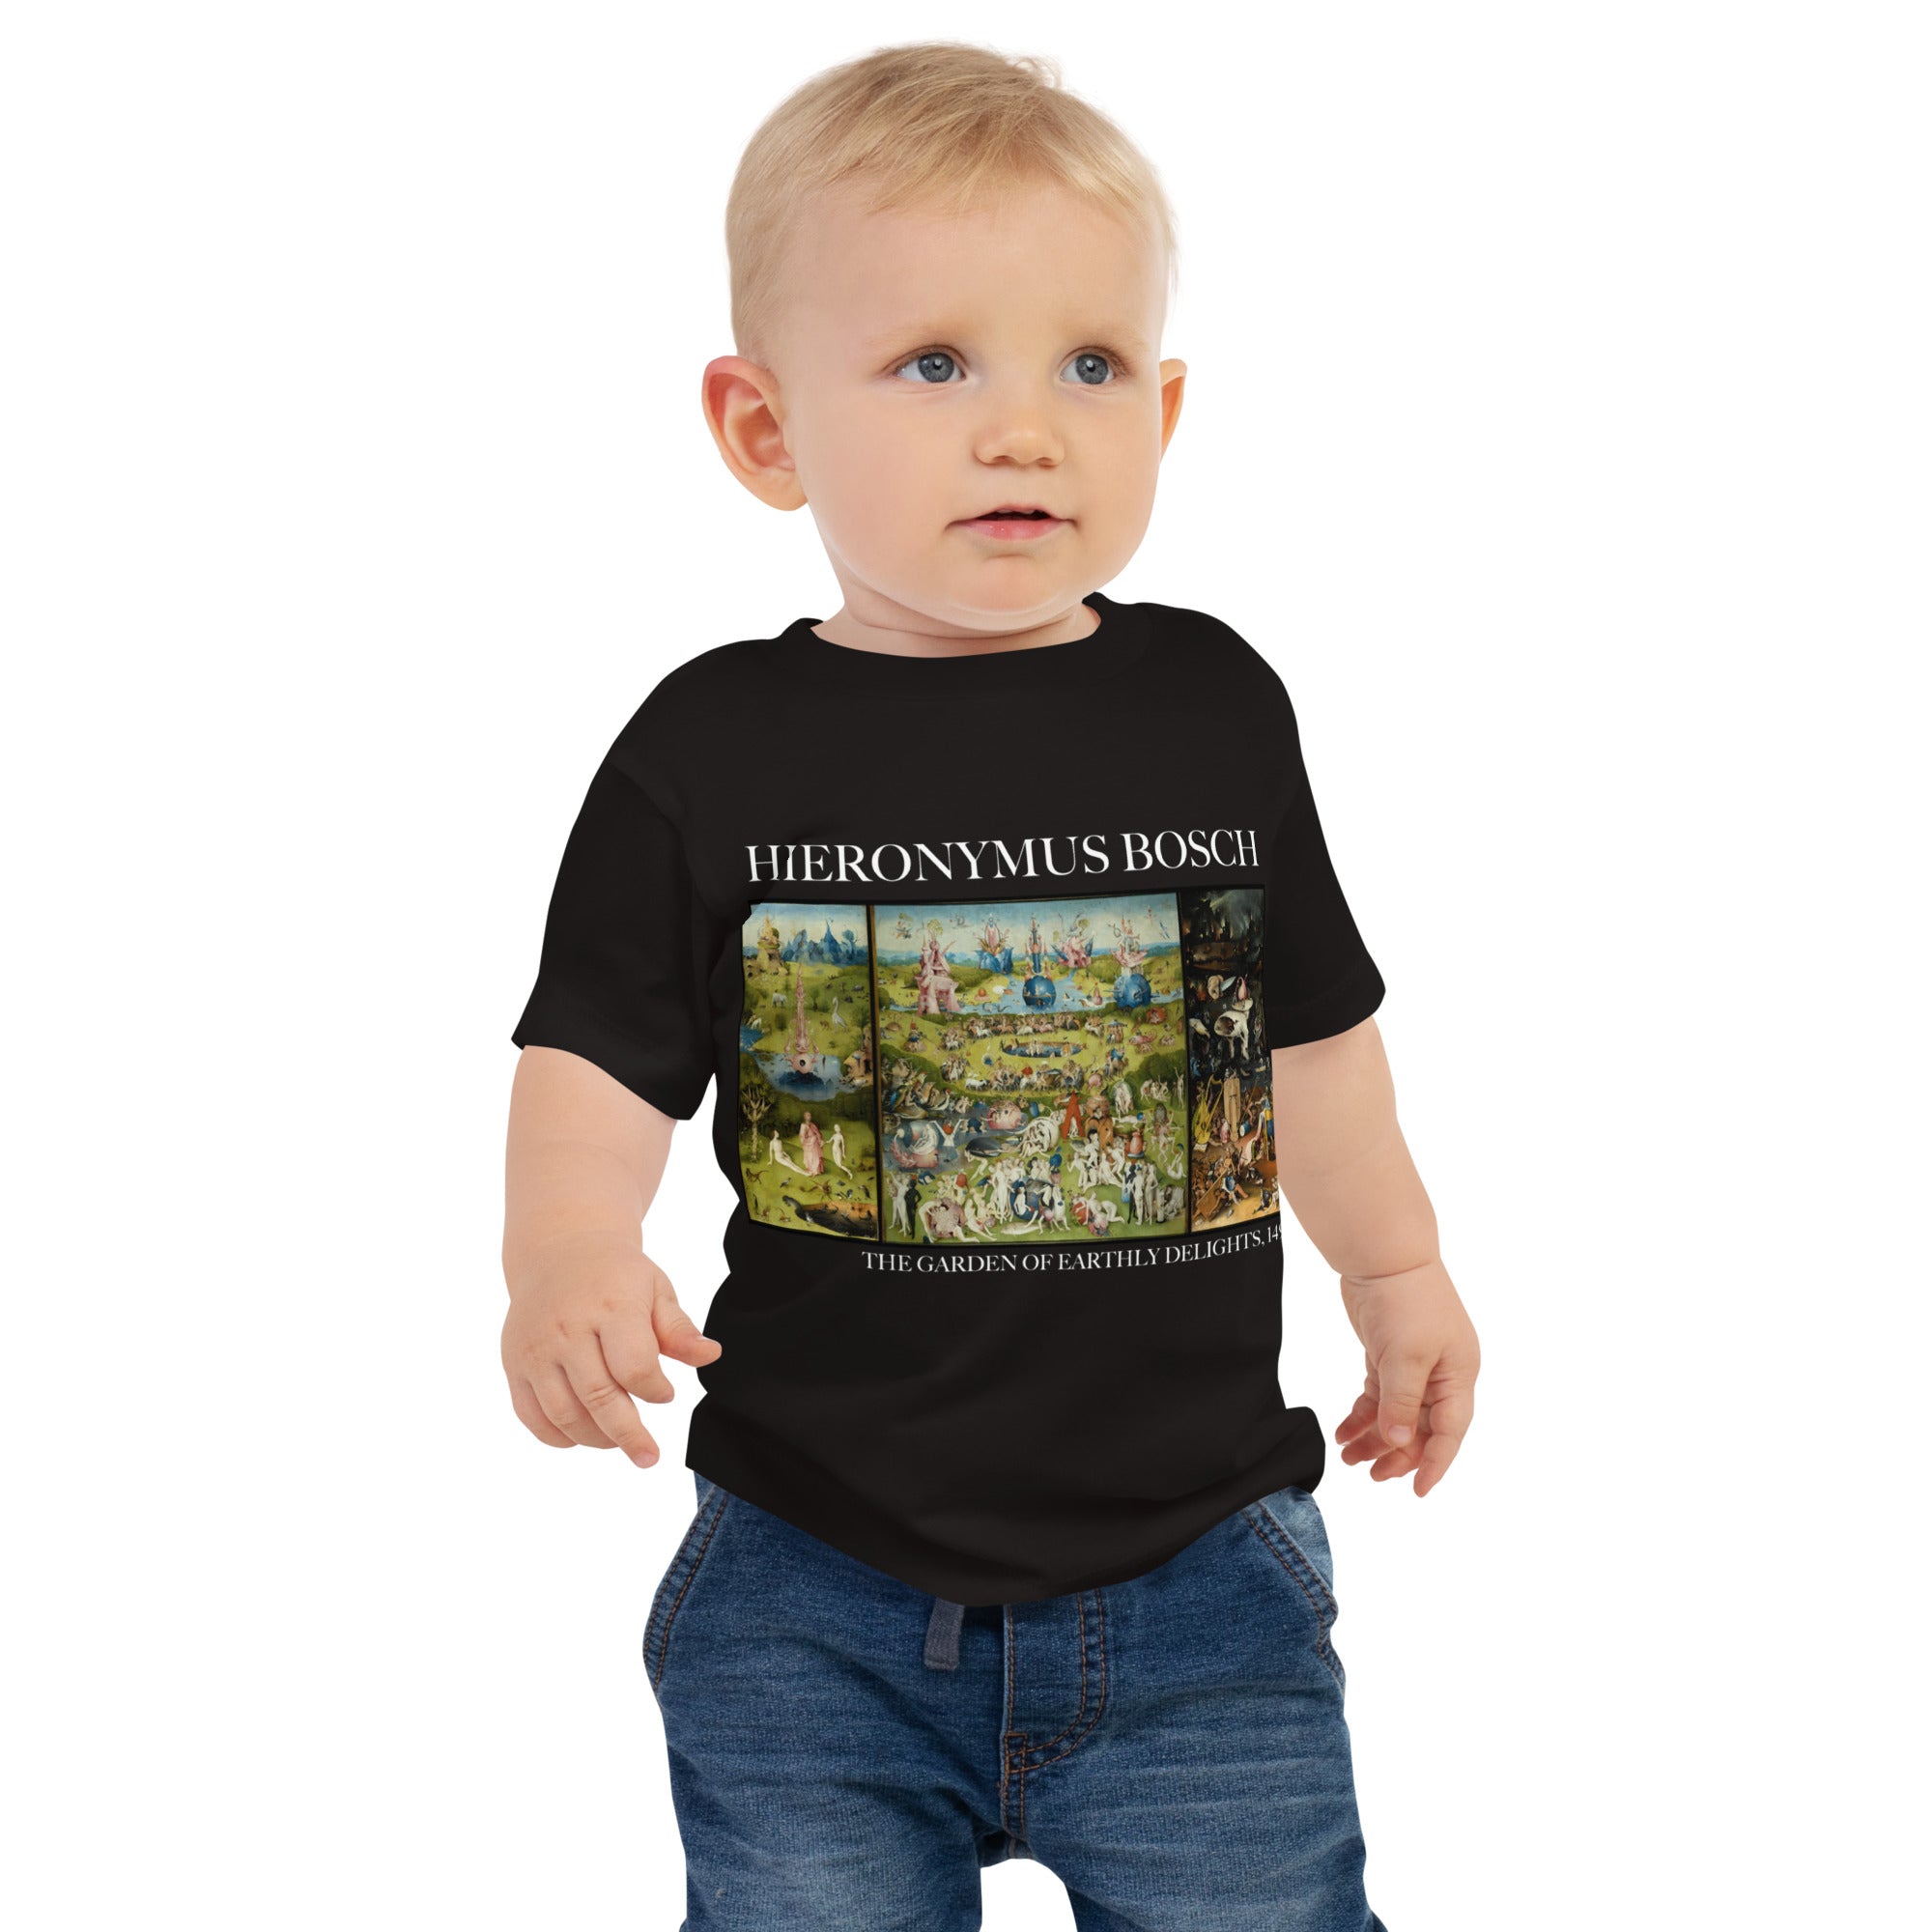 Hieronymus Bosch 'The Garden of Earthly Delights' Famous Painting Baby Staple T-Shirt | Premium Baby Art Tee